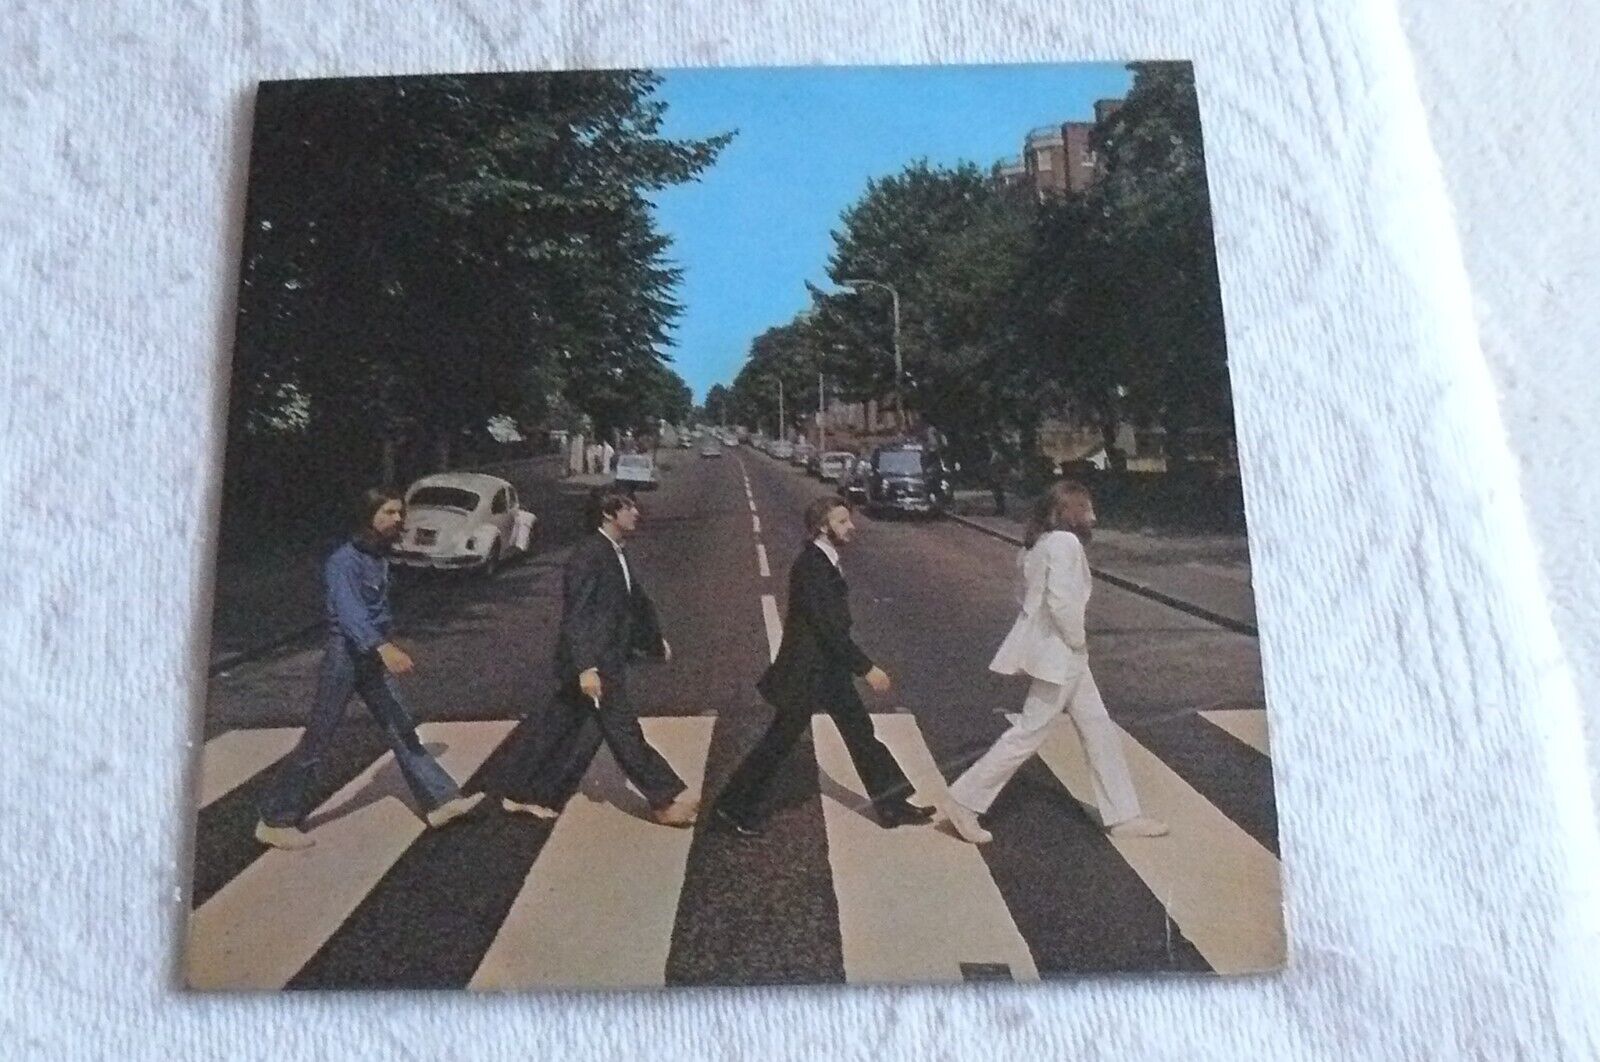 BEATLES - ABBEY ROAD LP MADE IN INDIA  BLACK PARLOPHONE